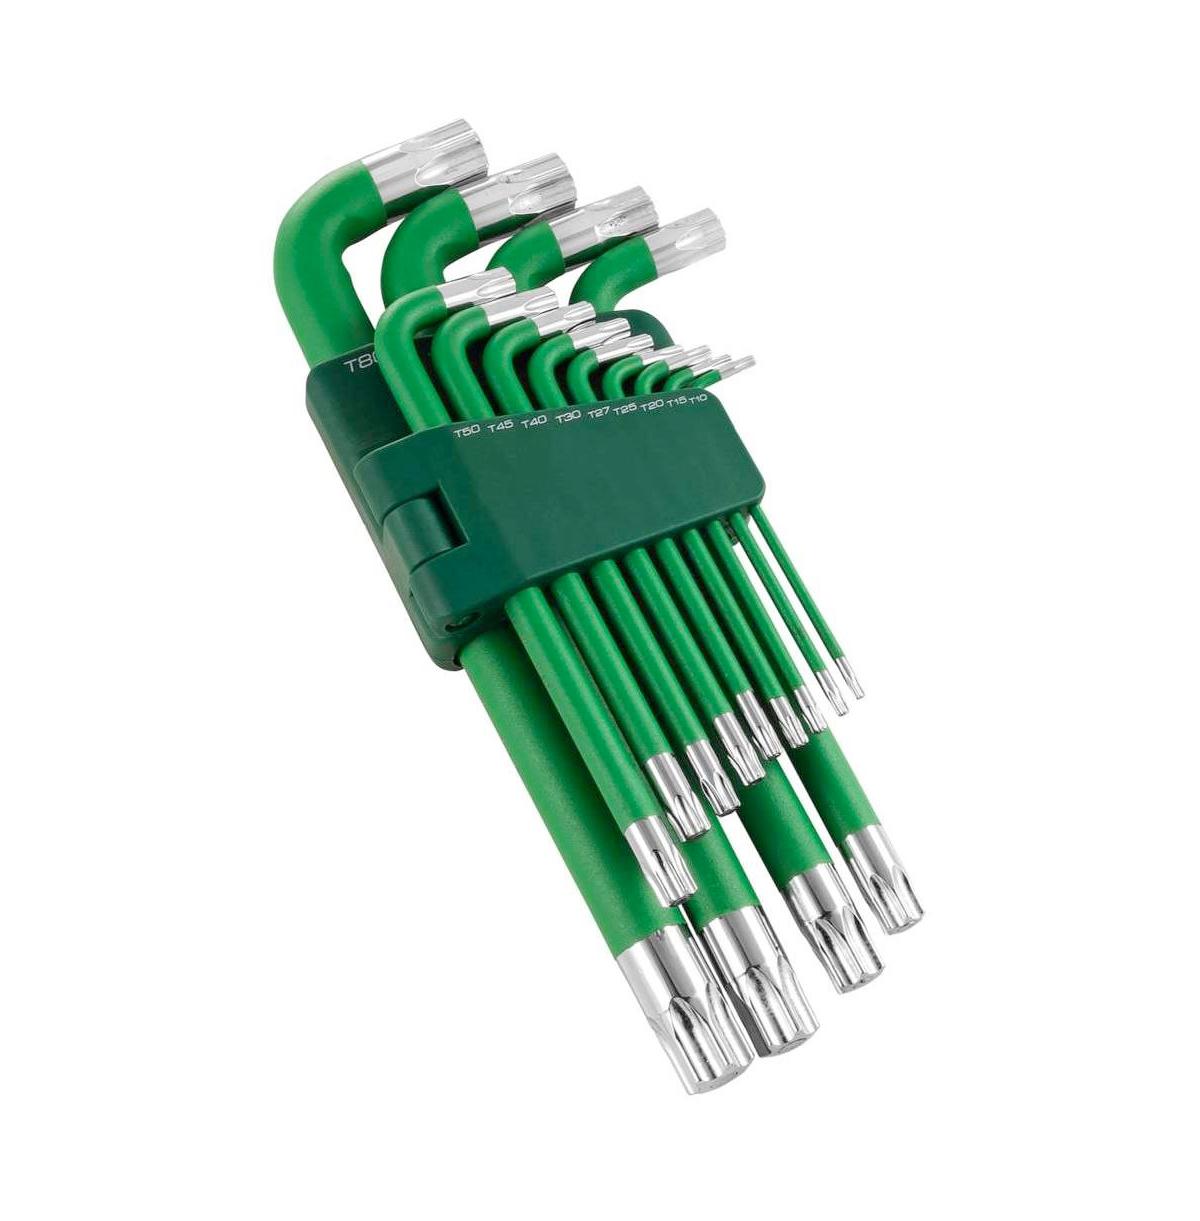 13 Piece Torx Long Arm Magnetic Hex Key Wrench Set Green - Green